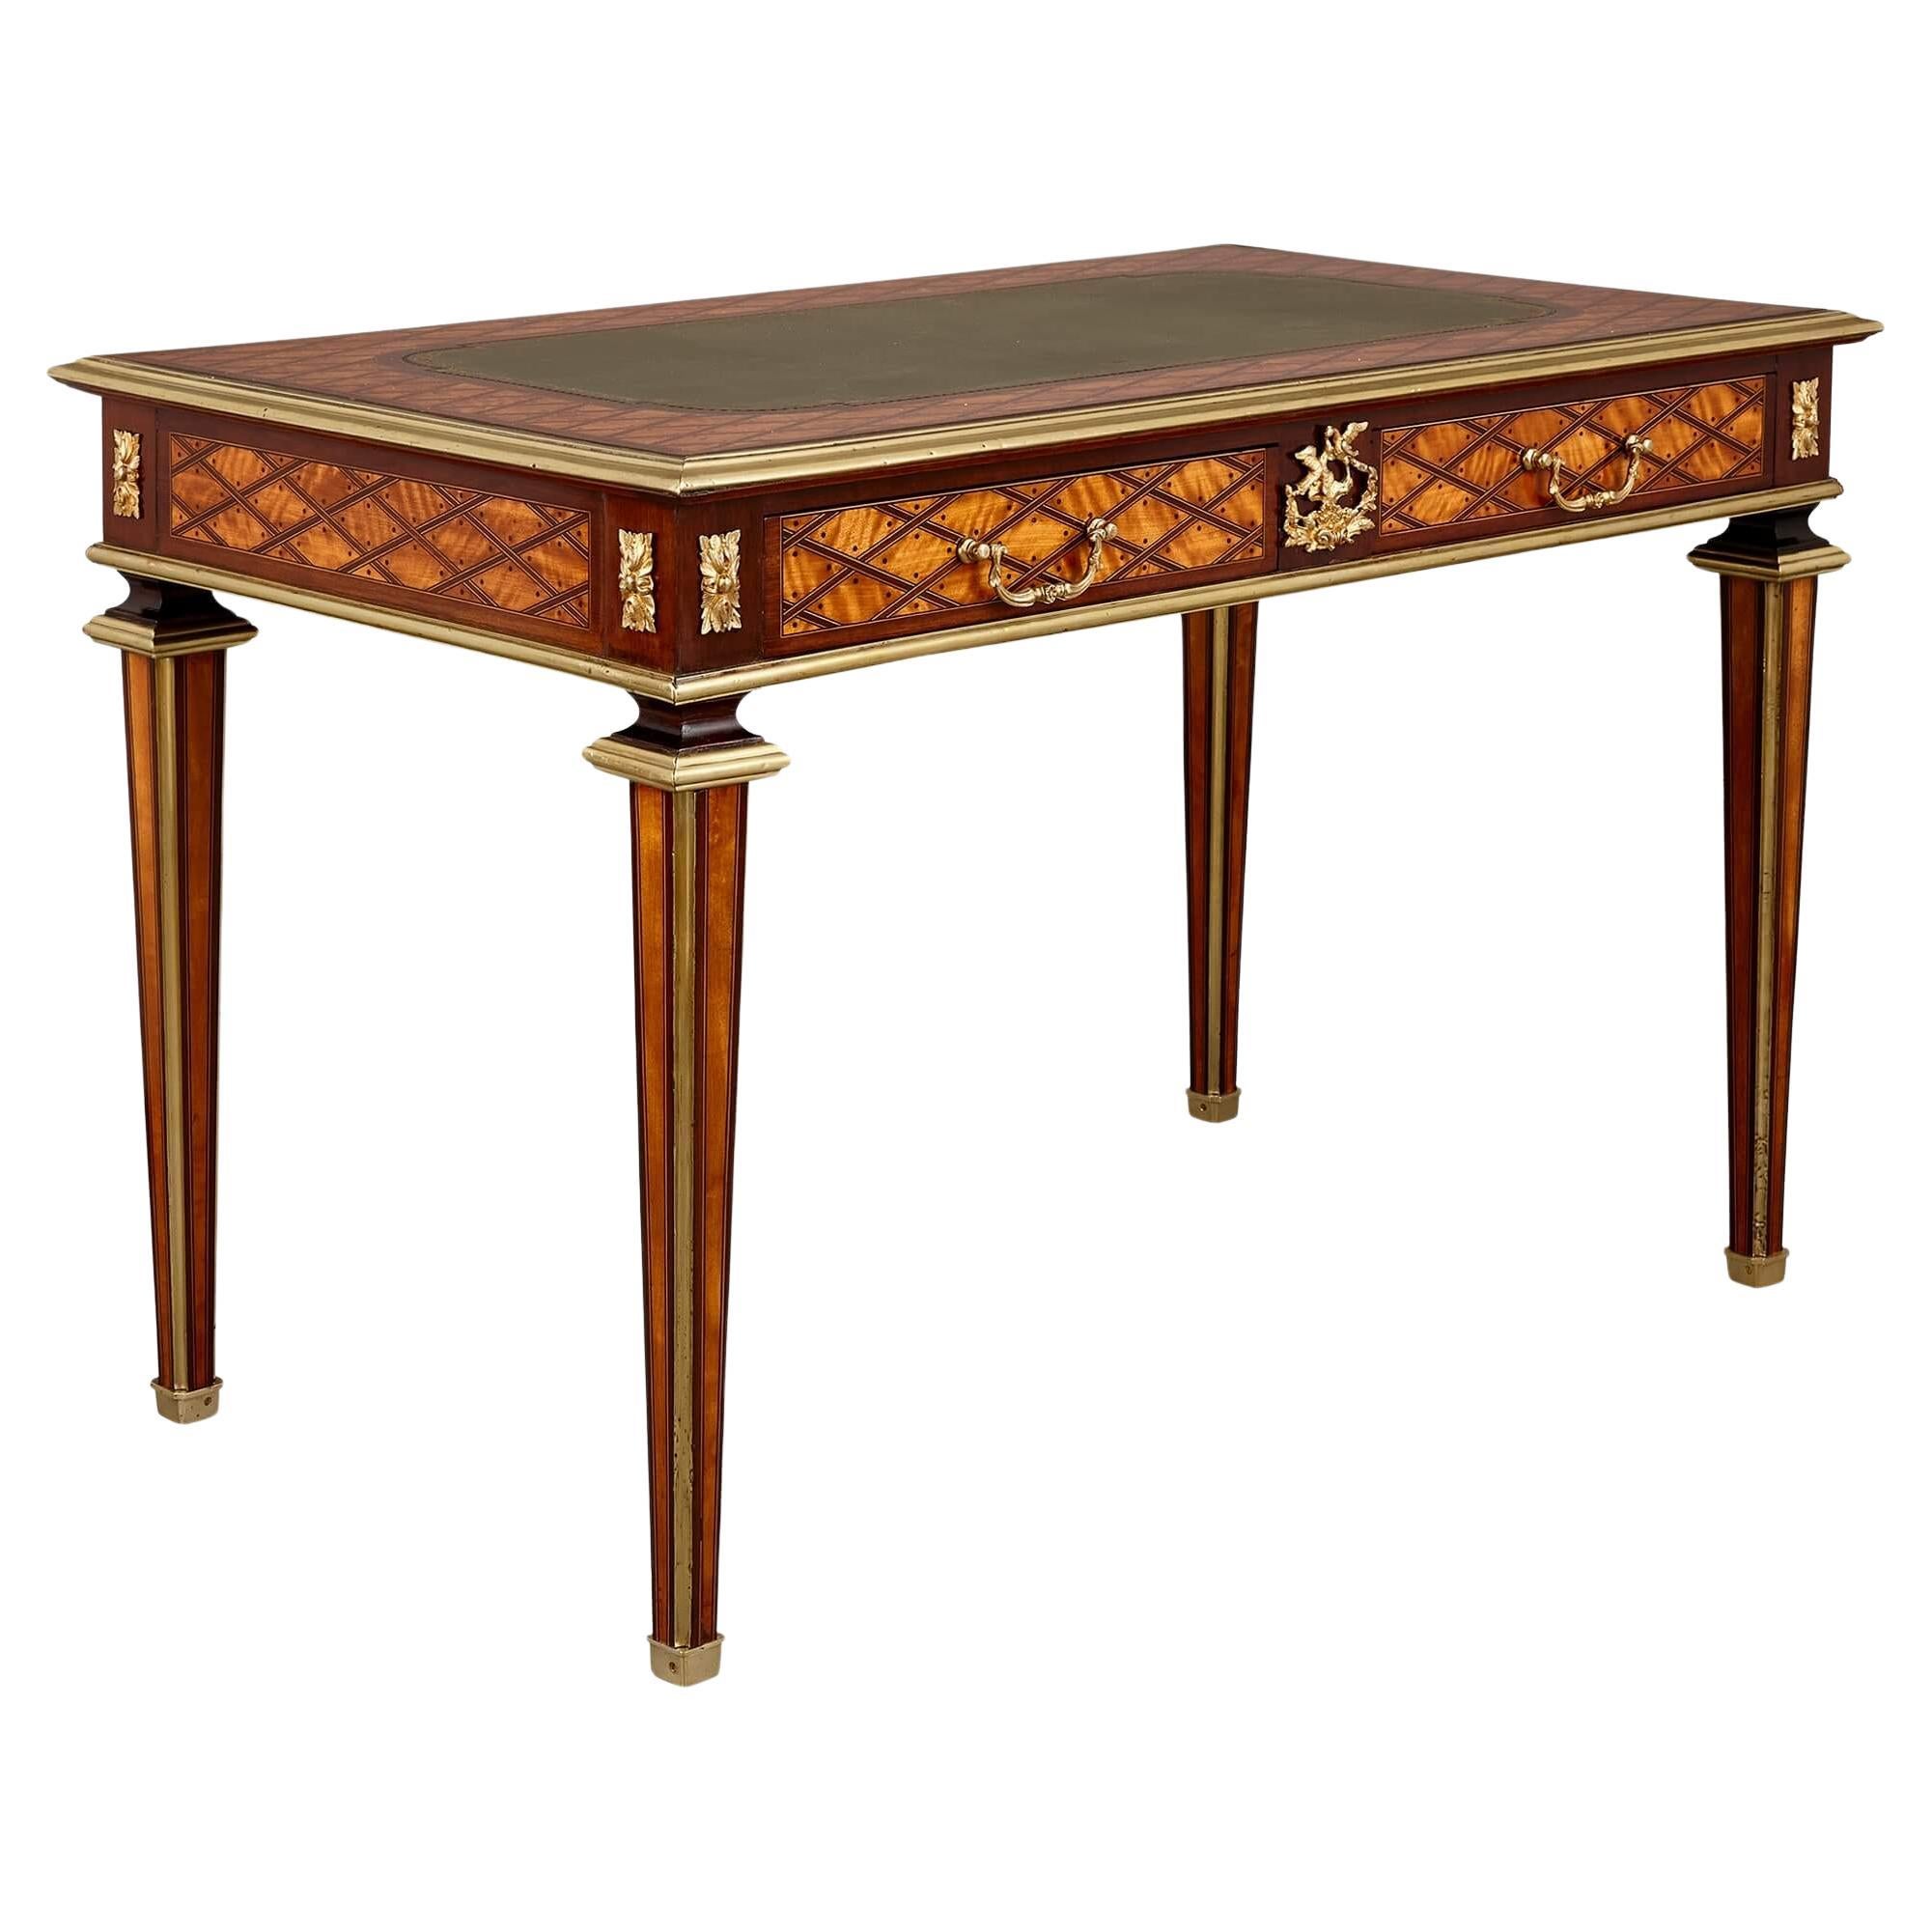 Louis XVI Style Mahogany, Satinwood, Ebony and Ormolu Writing Desk by D. Ross For Sale